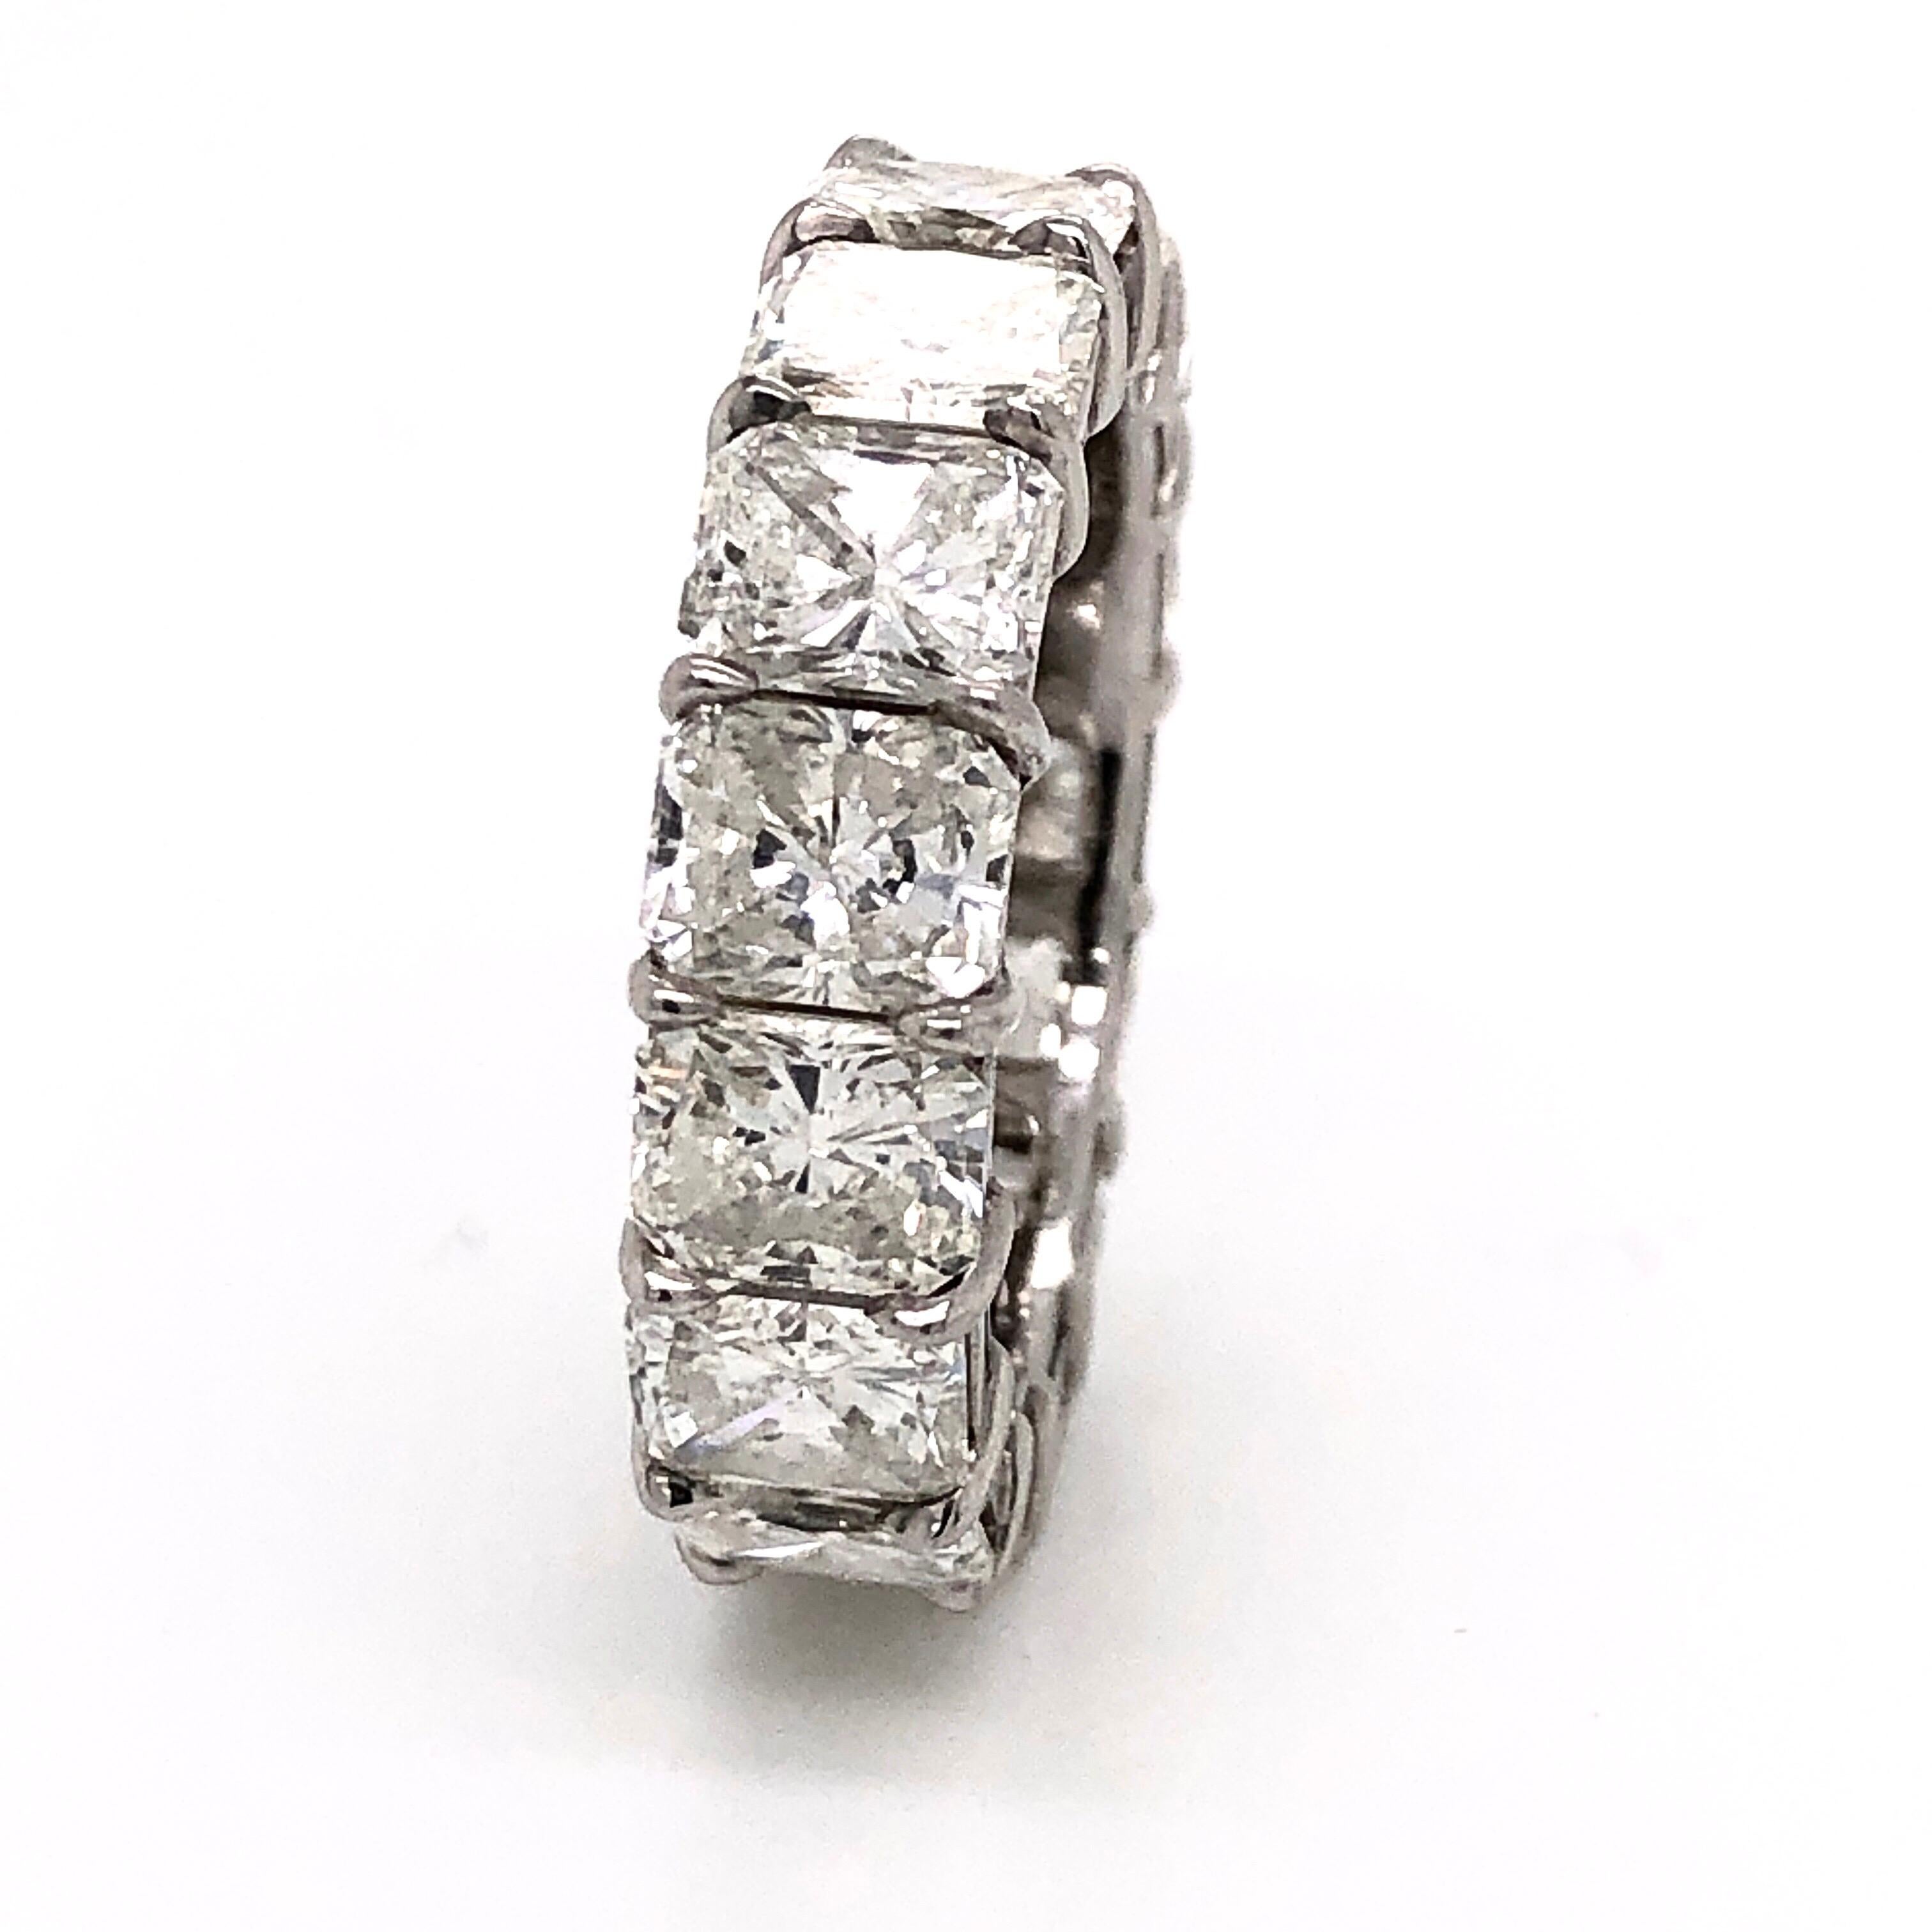 Ring size 5.75. Can be resized into any finger size. 15 Long radiant cut diamonds H color Vs-Si1 clarity diamonds totaling 8.72cts hand made in Platinum. Each diamond is .58cts and because of the excellent long measurements we hand picked, the